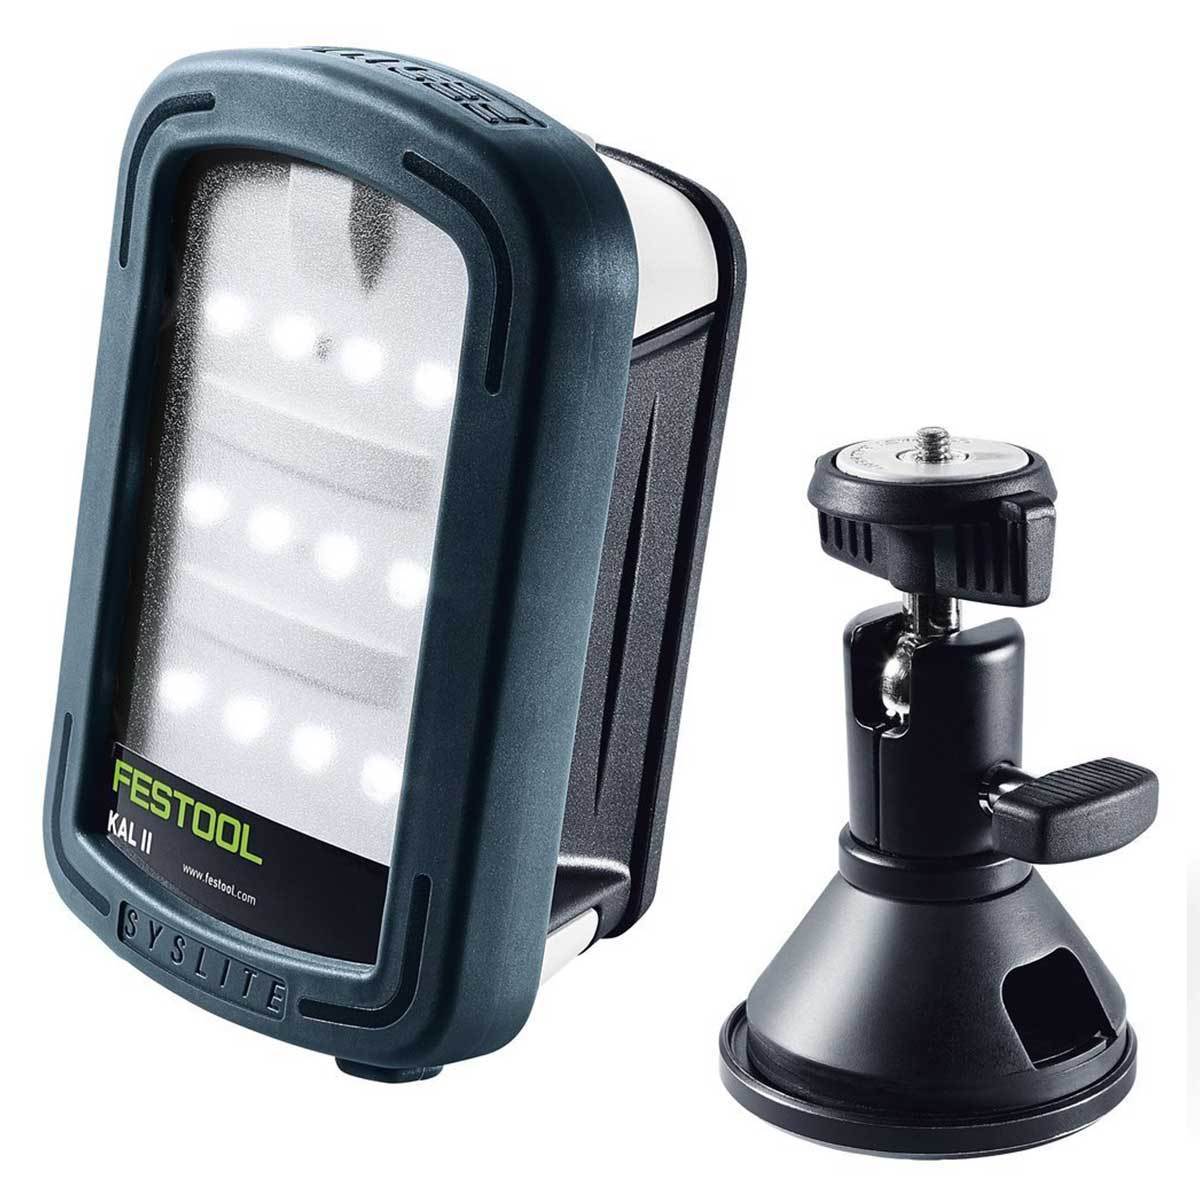 The SysLite II has 12 LEDs and a tough rubber housing. Ridges on the asymmetrical body provide a secure grip. W/adapter.